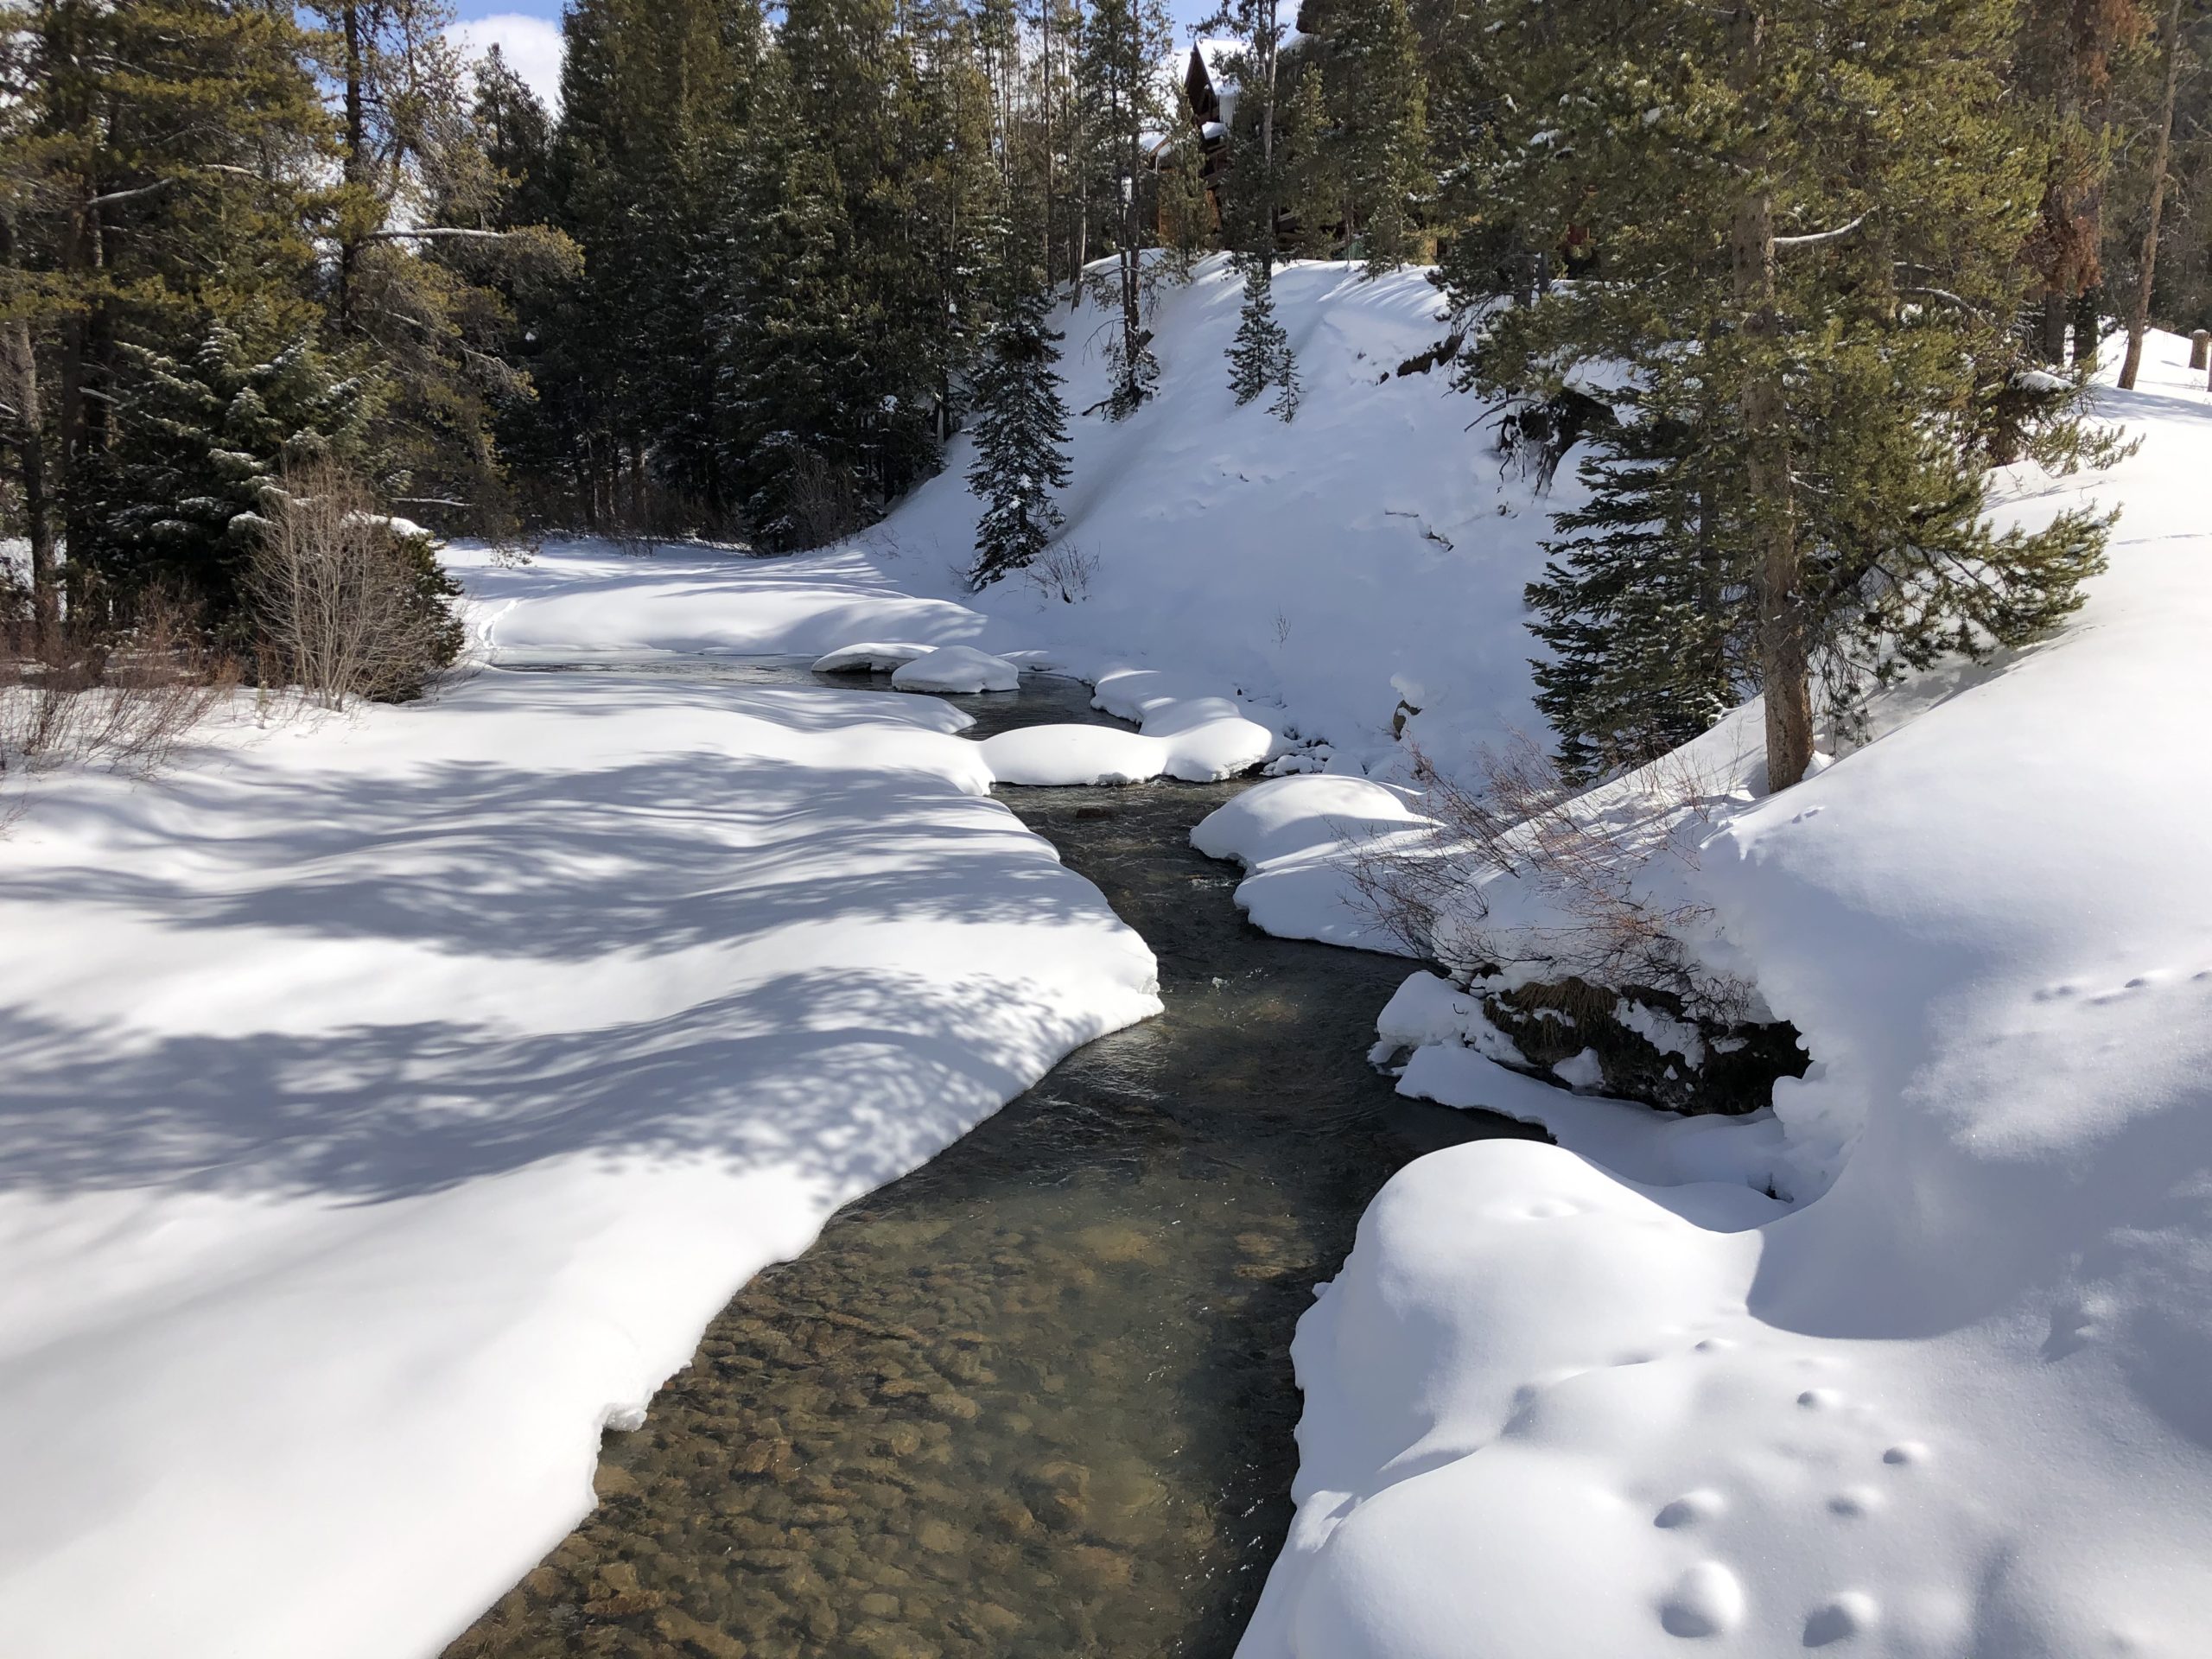 The Snake River in Keystone on Feb. 19, 2020. The river is a tributary of the Blue River which supplies Dillon Reservoir in Summit County. Photo credit: Denver Water.